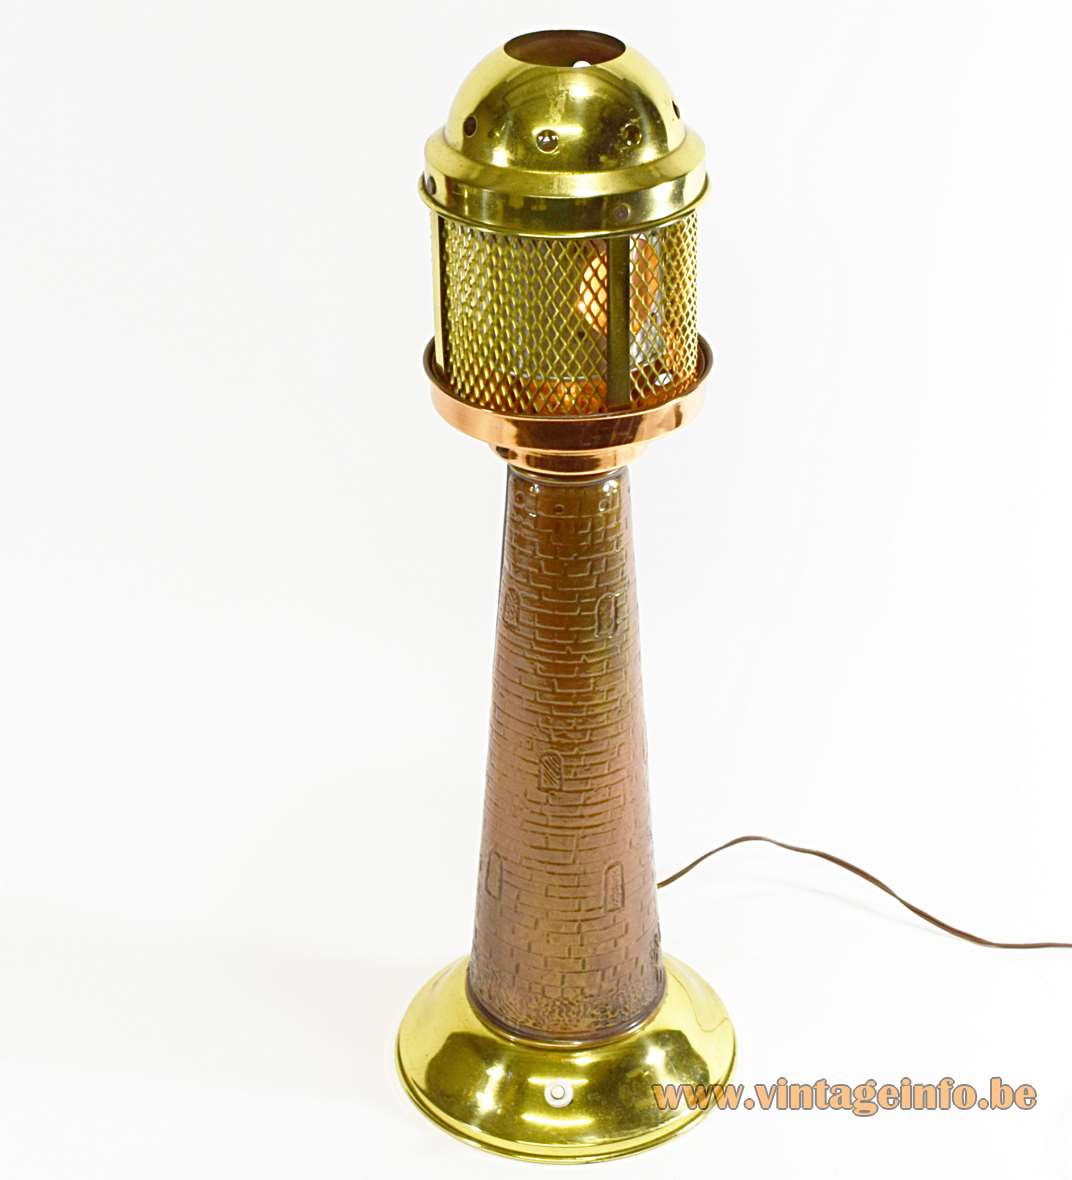 Lighthouse Table Lamp Vintageinfo, Lighthouse Table Lamp Large Size